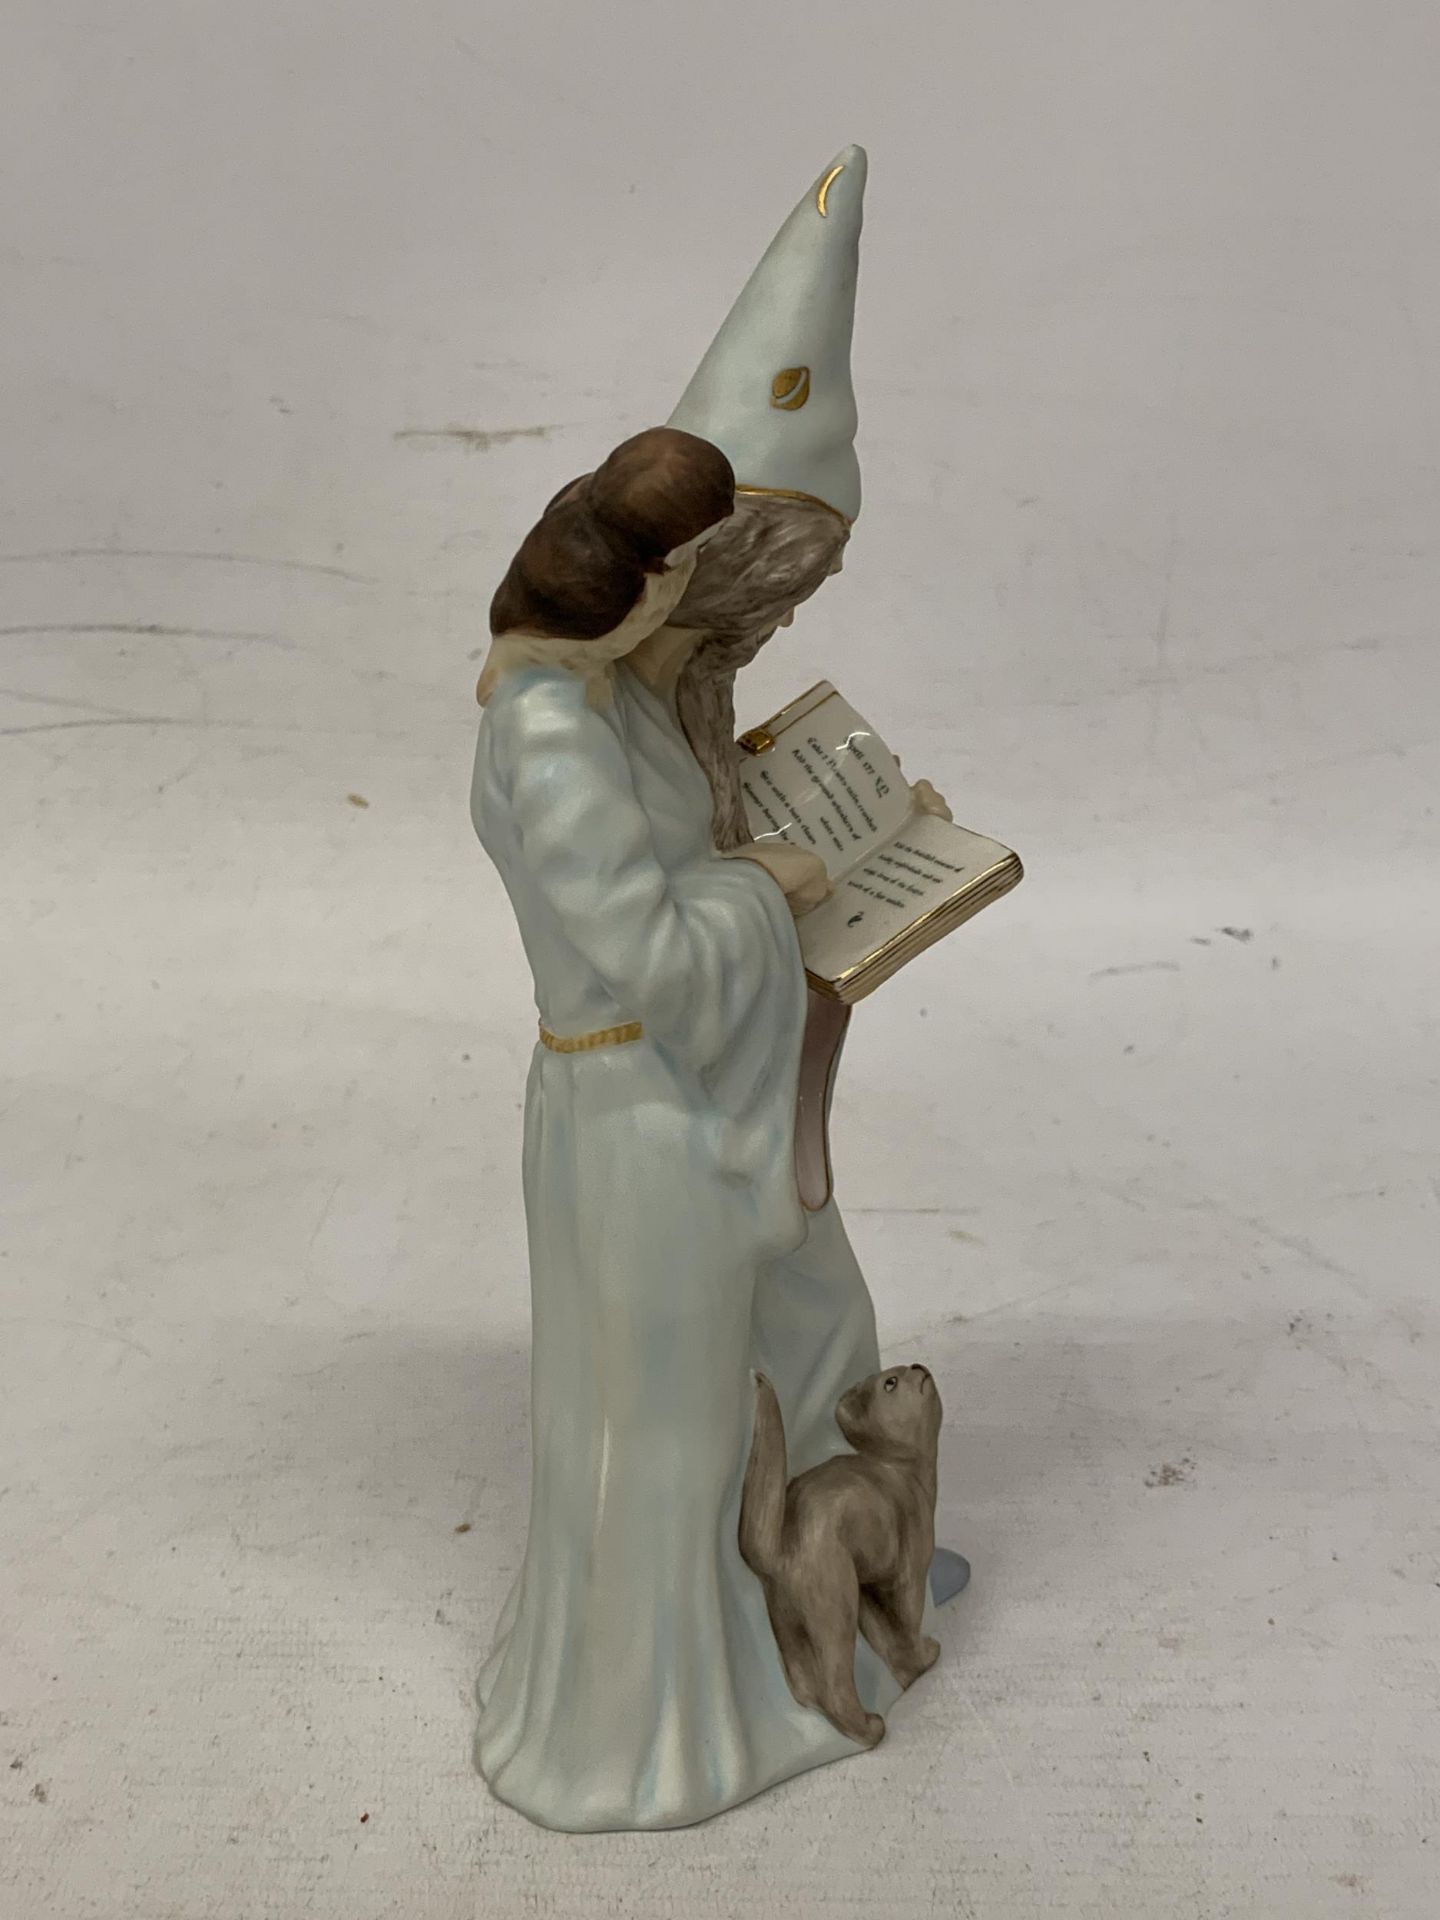 A ROYAL DOULTON FIGURE "THE WIZARD" HN 4069 LIMITED EDITION SIGNED IN GOLD - Image 2 of 5